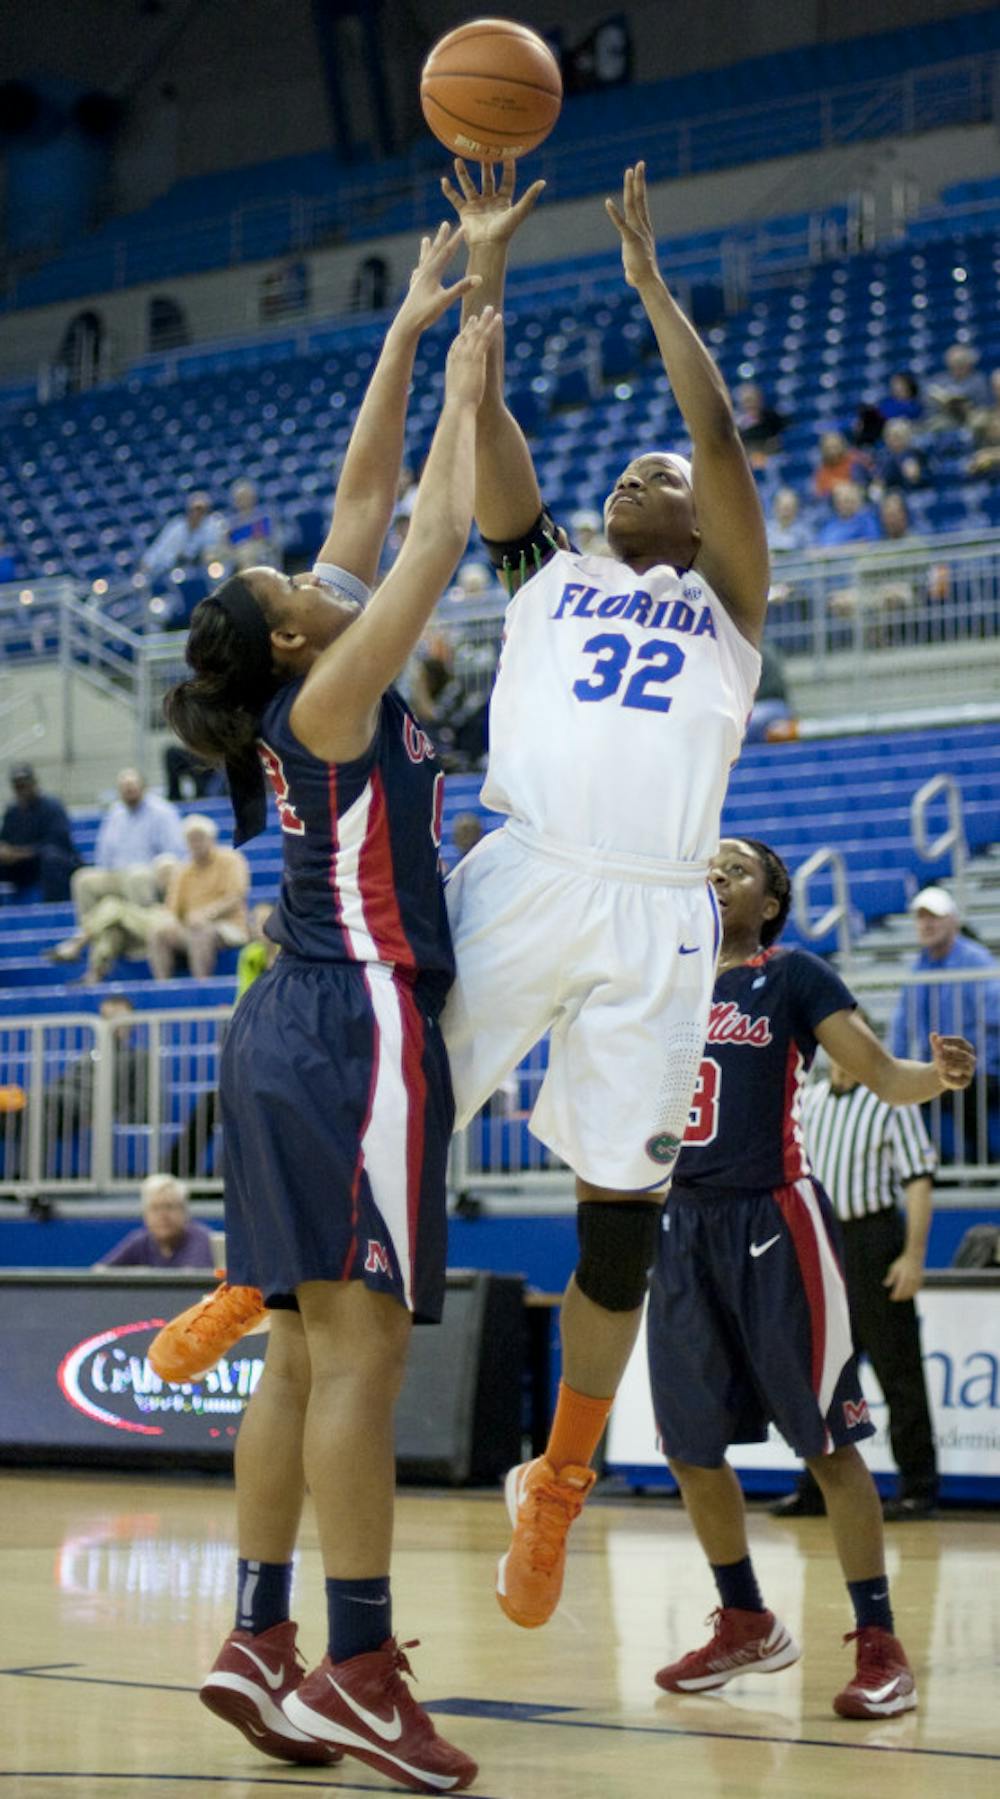 <p><span>Forward Jennifer George attempts a shot during Florida’s 88-81 loss to Ole Miss on Jan. 24 in the O’Connell Center. The Gators have lost four consecutive games in Southeastern Conference play.</span></p>
<div><span><br /></span></div>